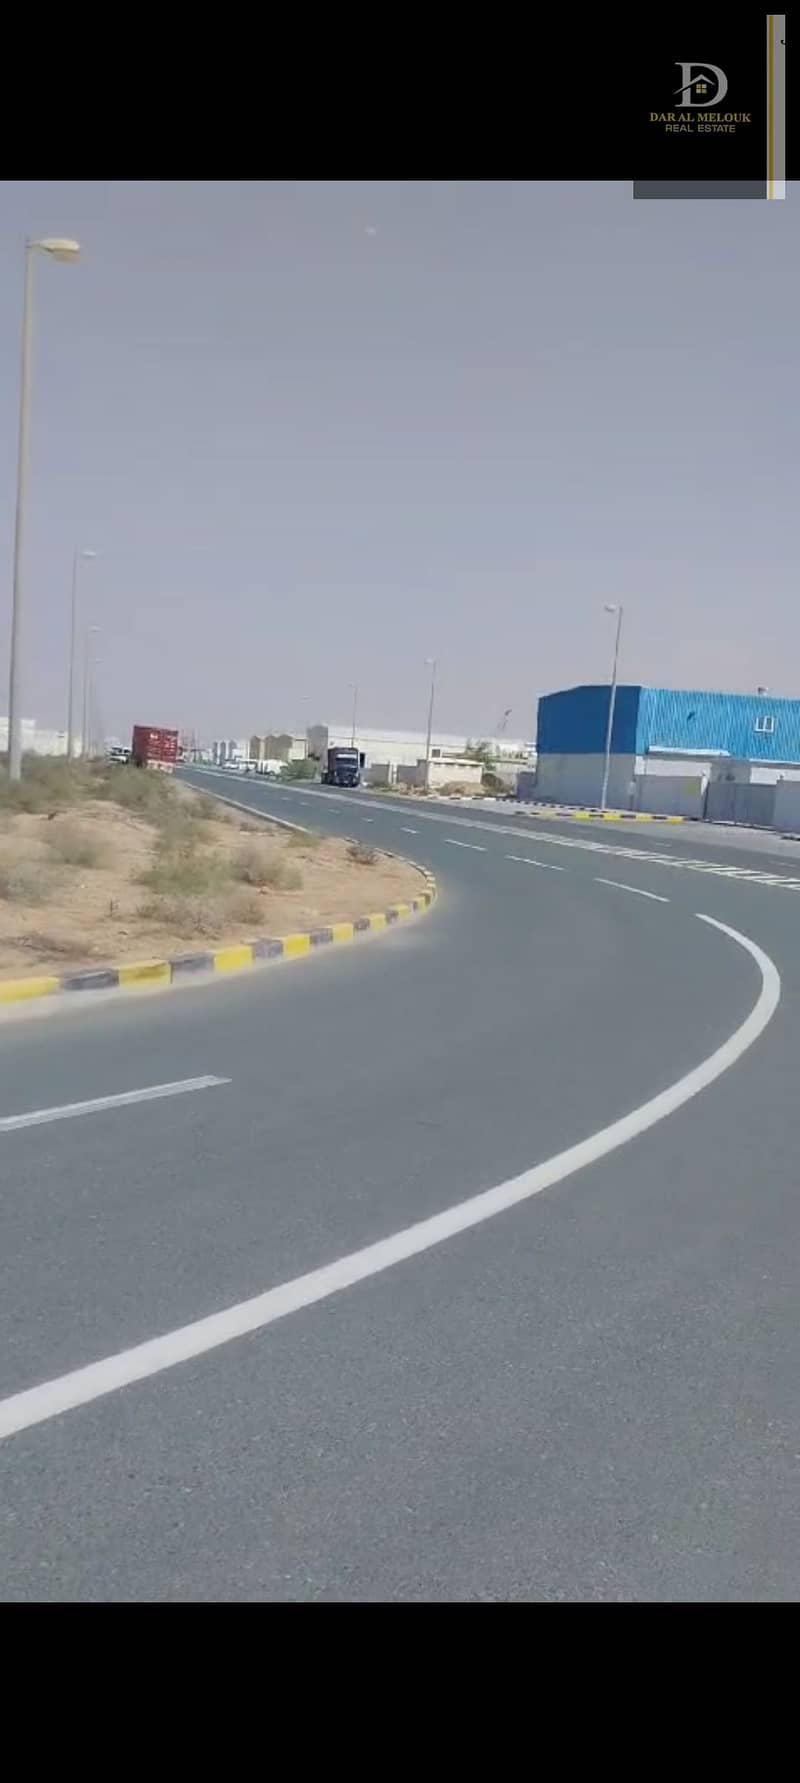 For sale in Sharjah, the old Al-Saja’a industrial area, Al-Hano, commercial land, area of ​​68,000 thousand feet, corner on two streets on the Emirates Industrial City Street, freehold, all nationalities, on a main street, close to the Al-Saja’a Industria